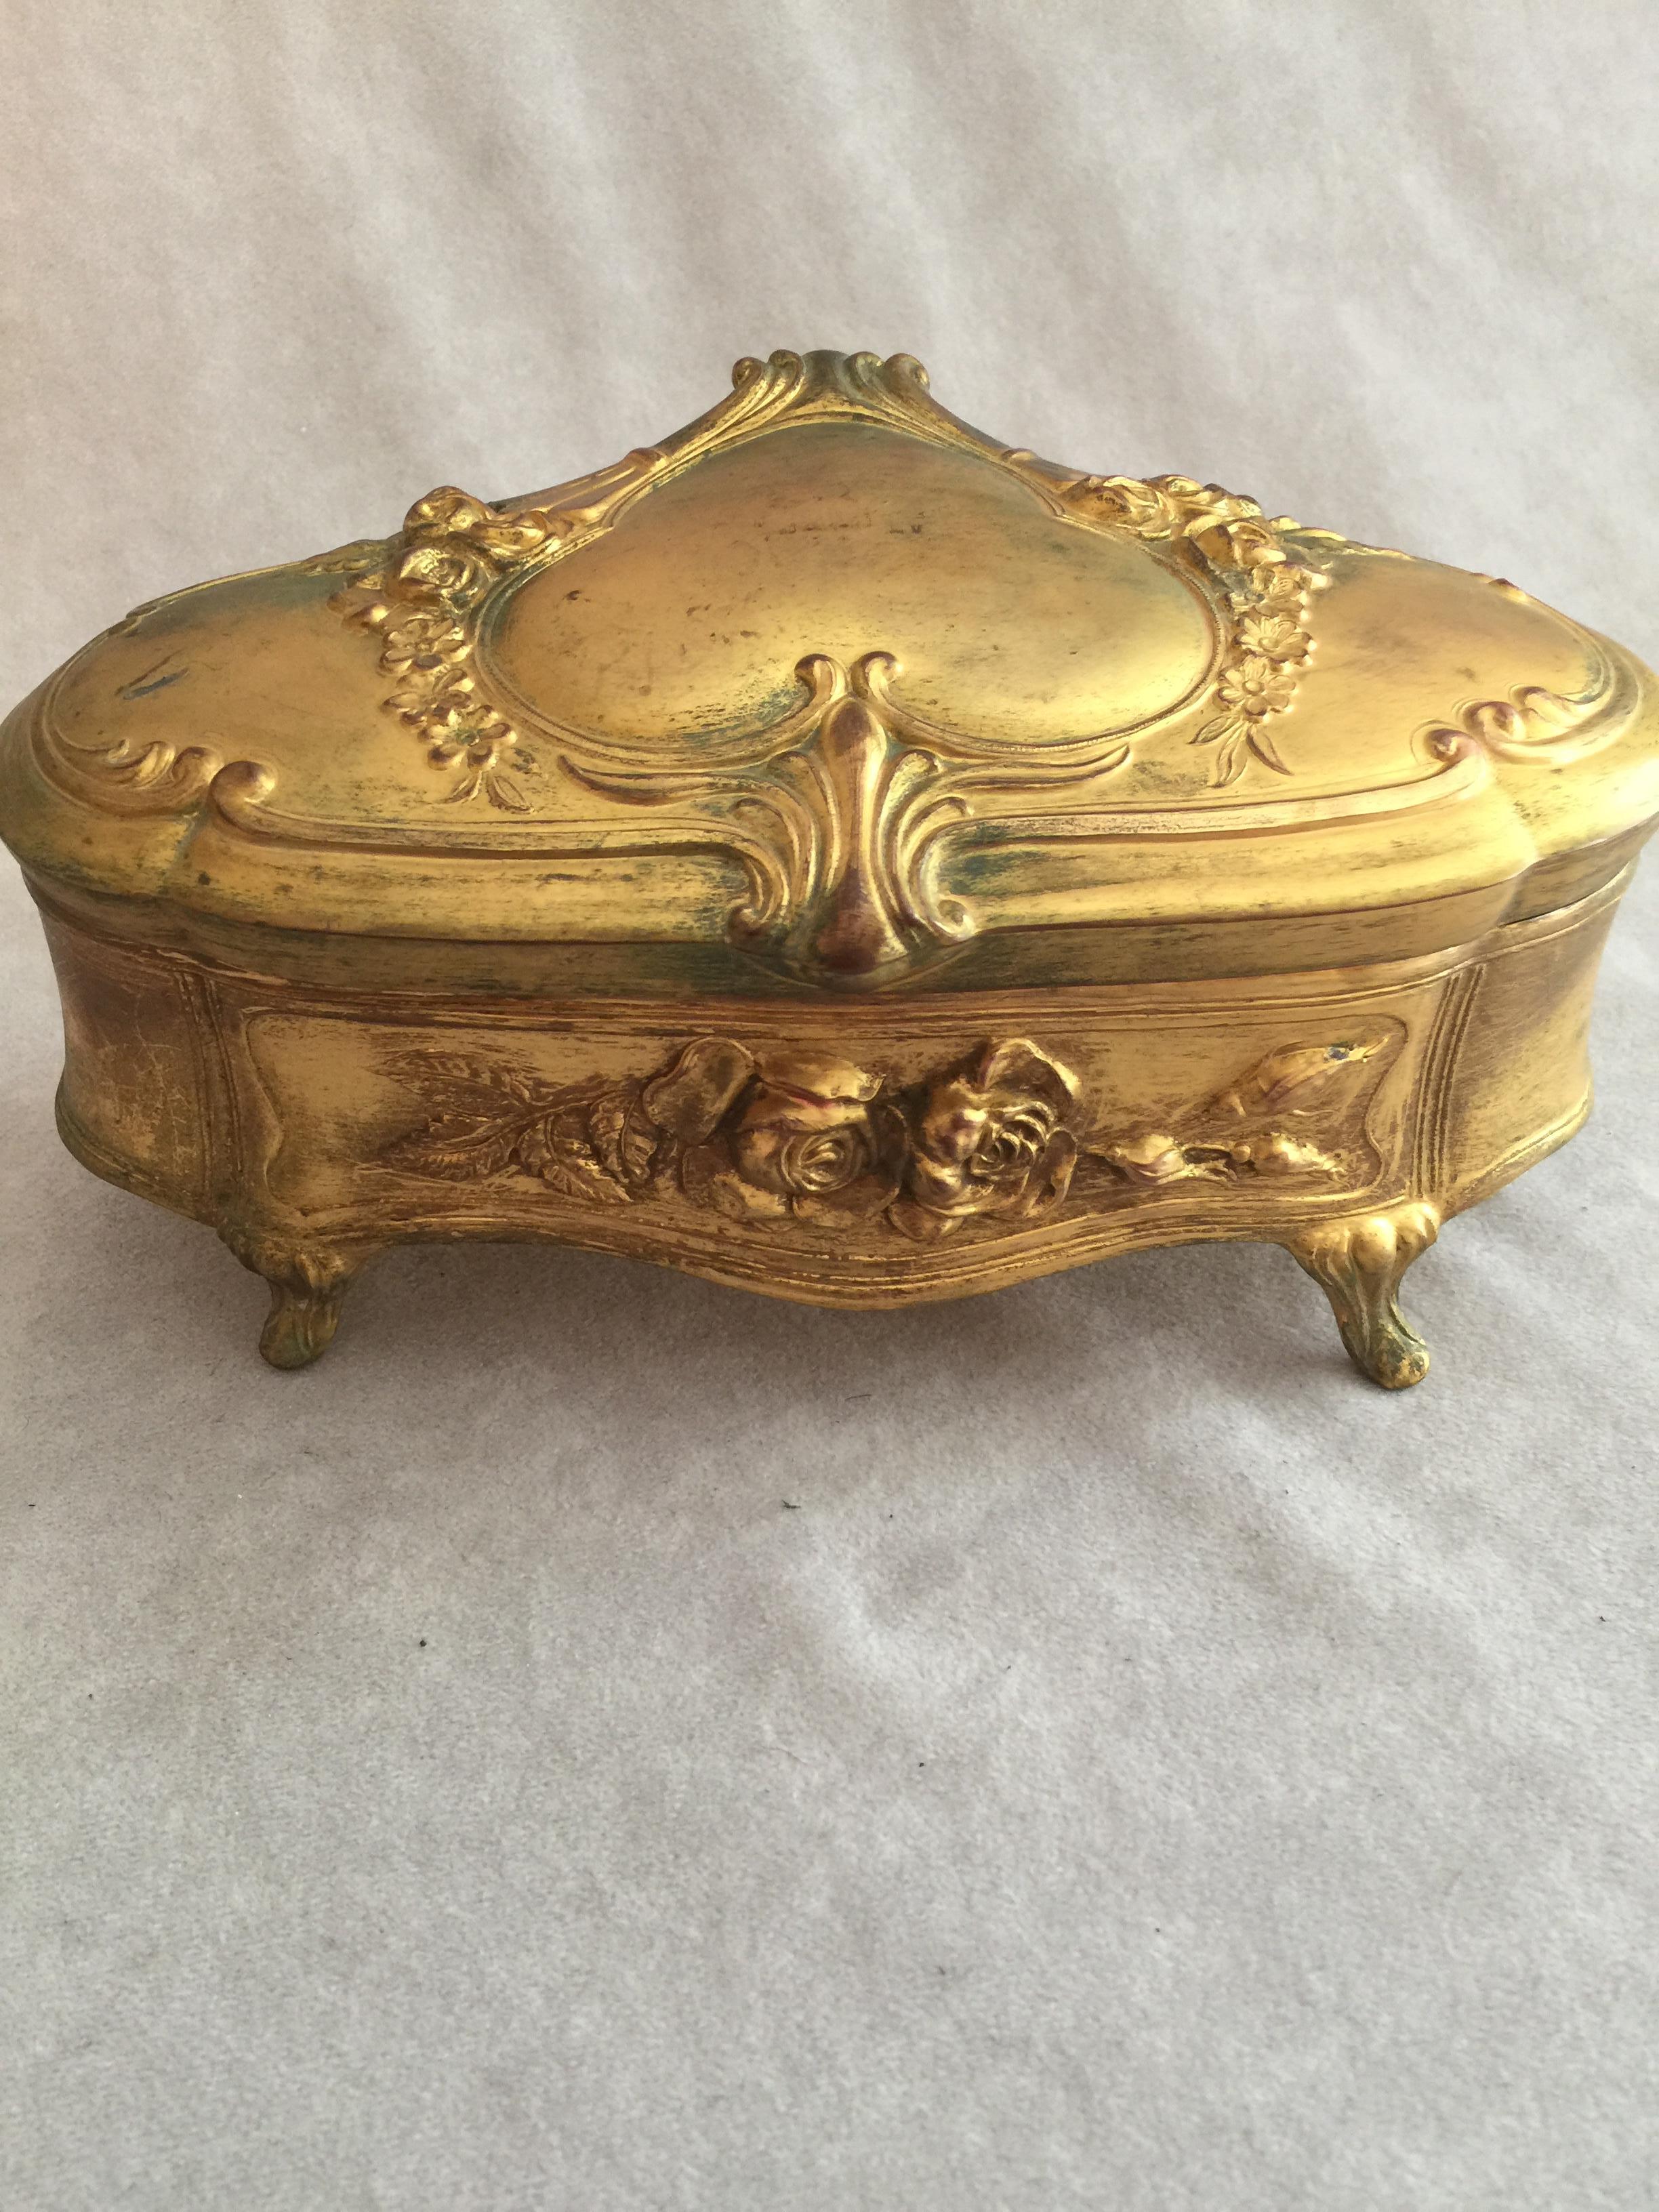 This richly gilt metal jewelry box makes a perfect gift for the lady in your life, in other words, no thought required. She will love it. Done in the art nouveau style with grace and beauty. It even has a heart on the cover for that extra touch.
